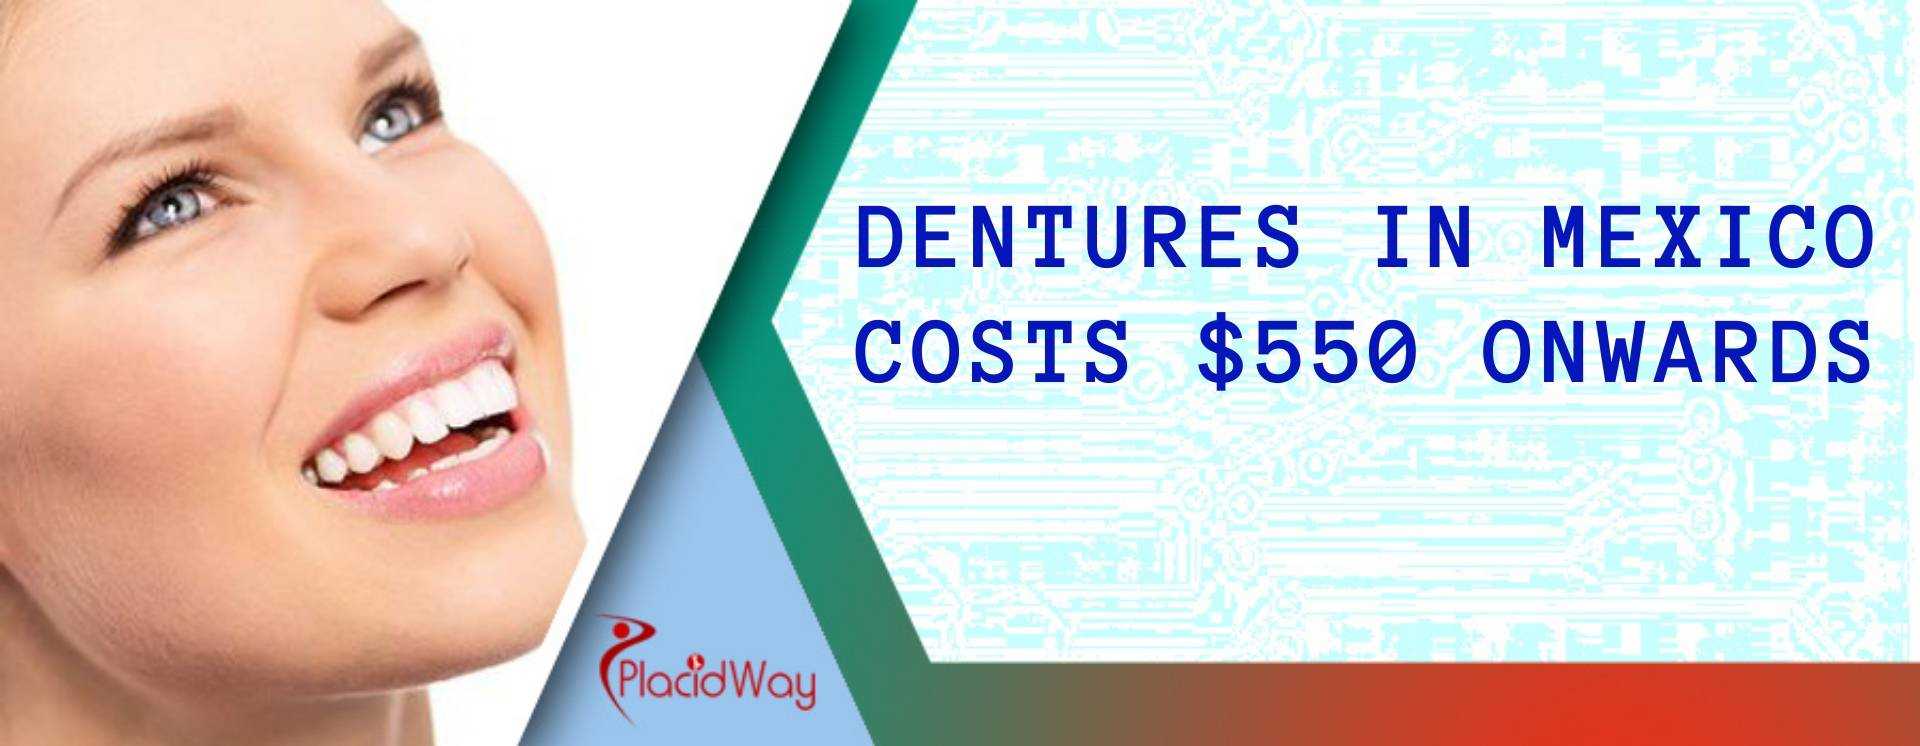 Cost of Dentures in Mexico